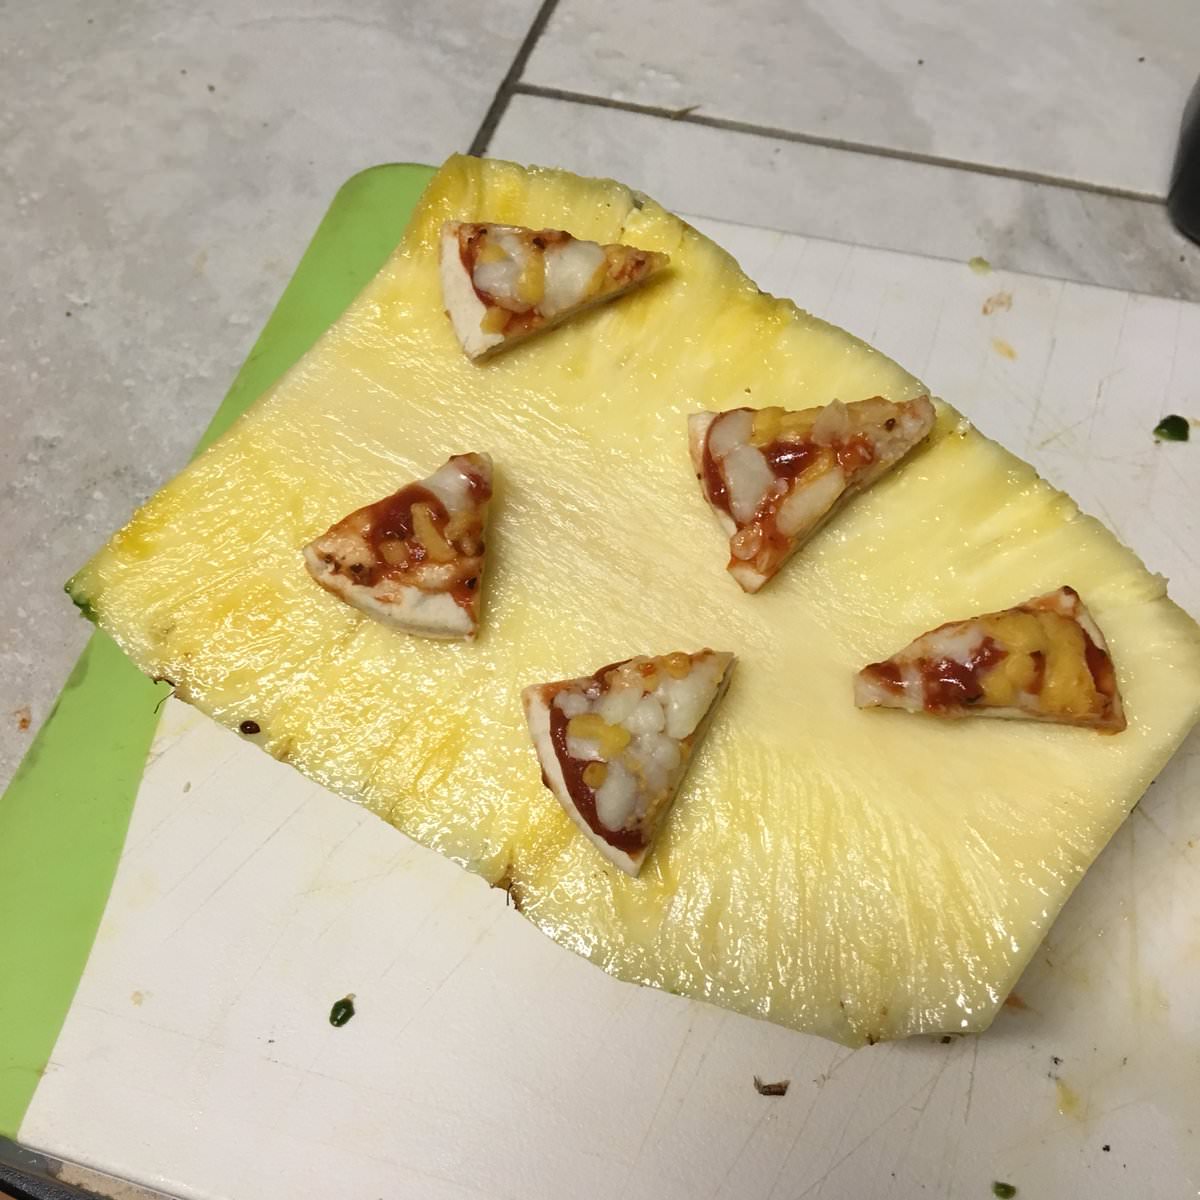 pineapple with pizza